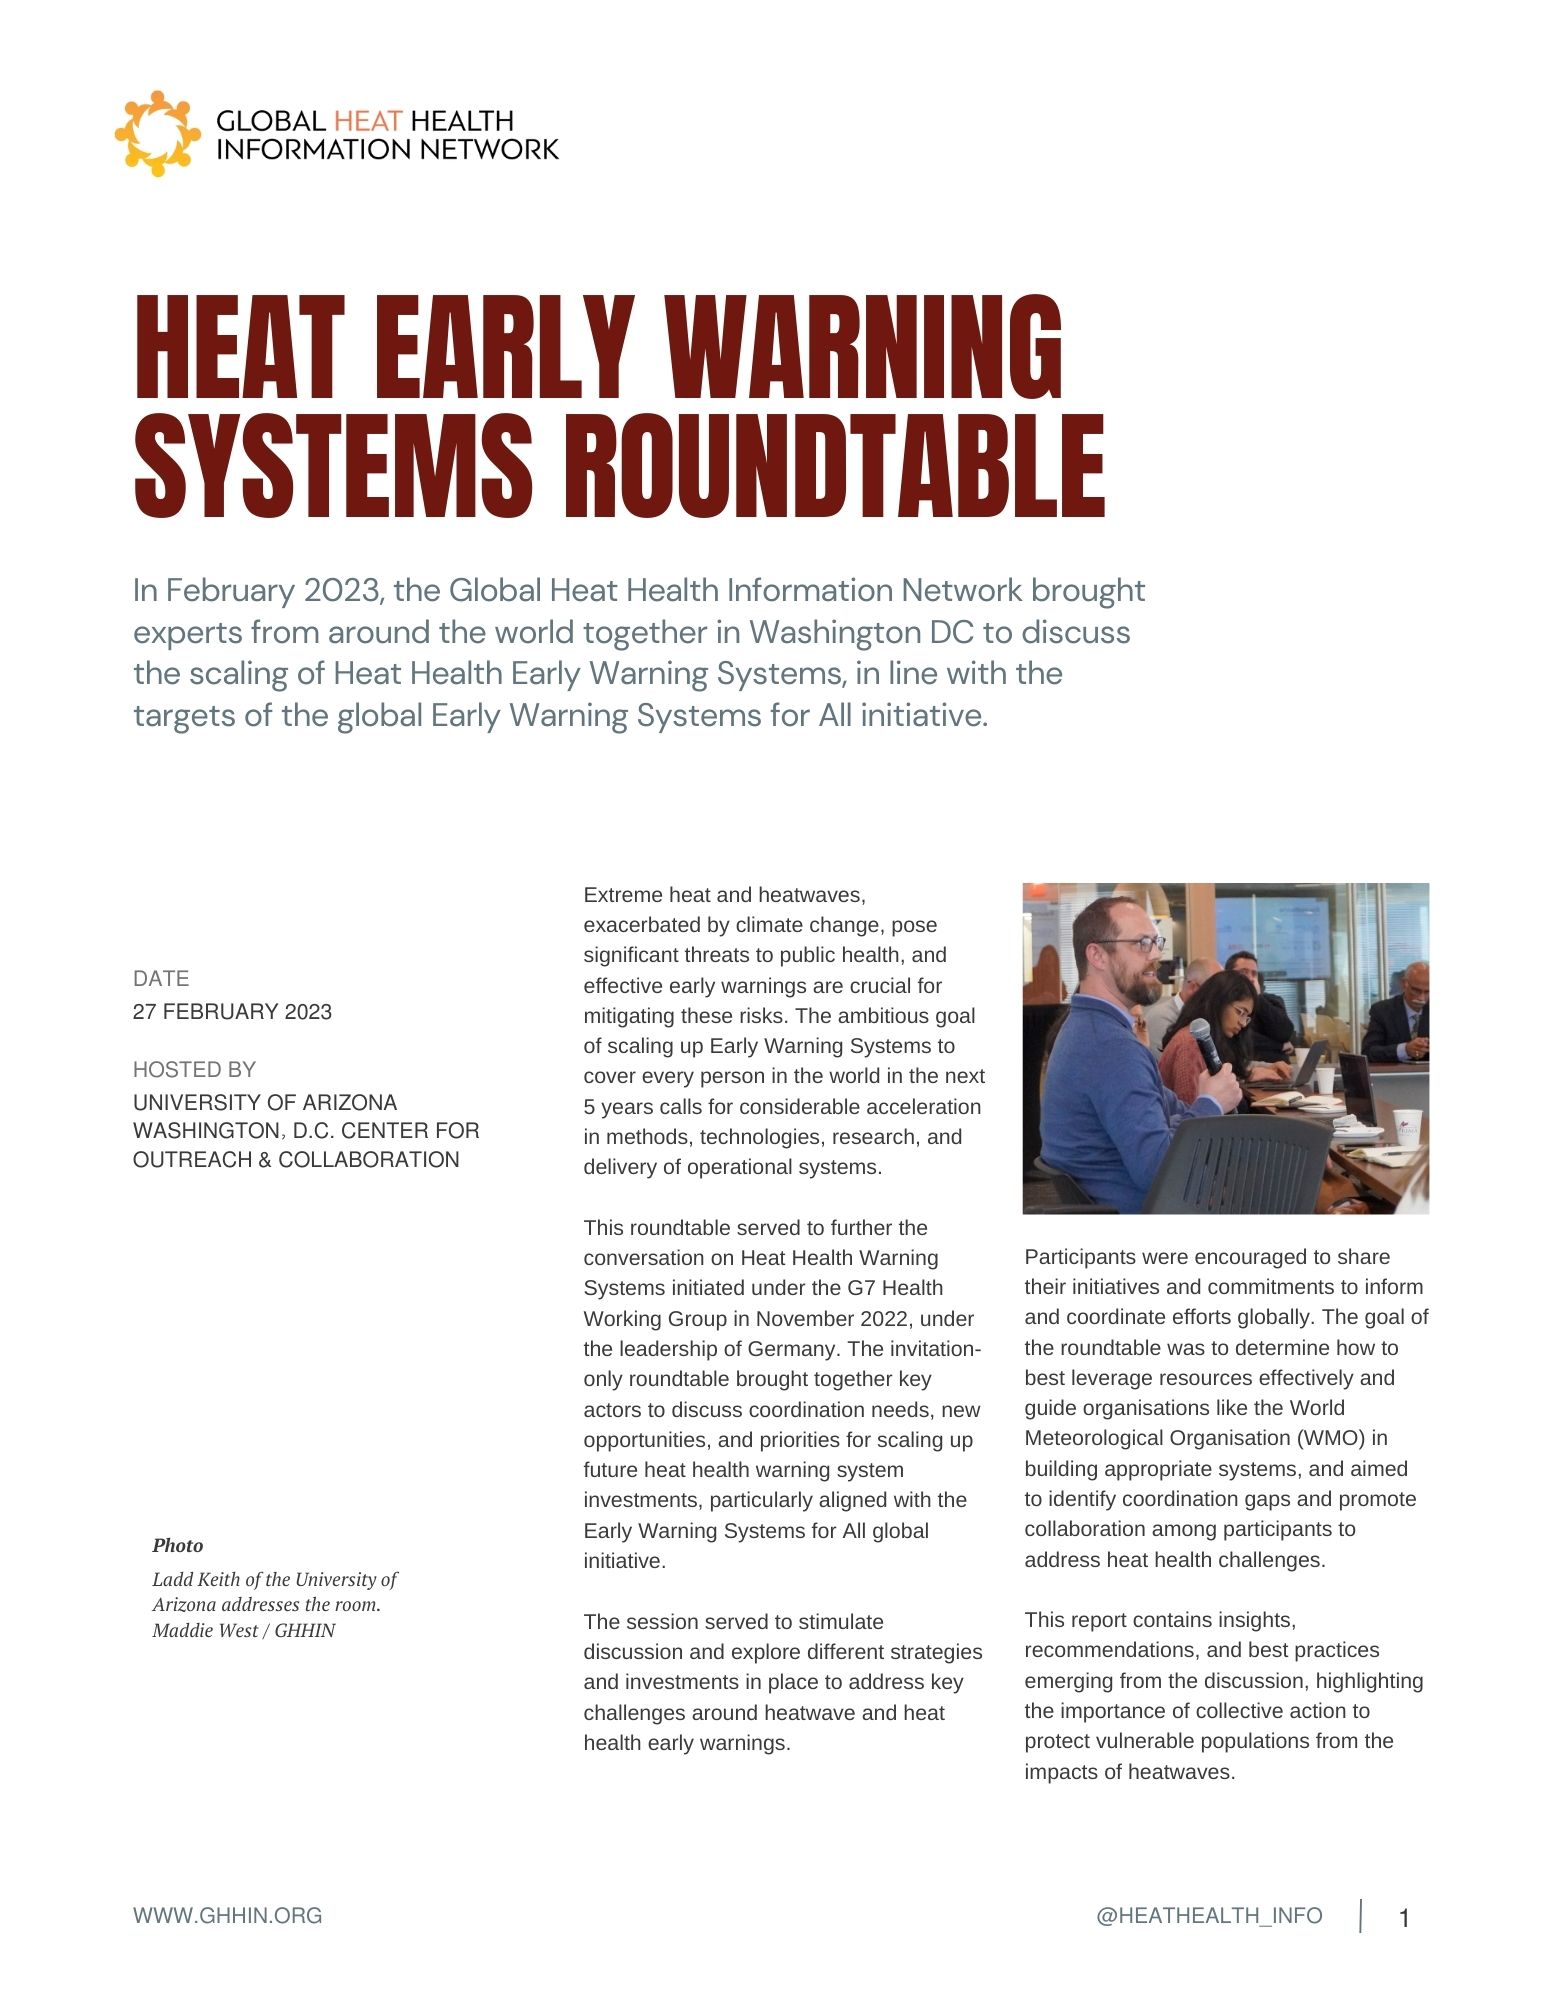 https://ghhin.org/resources/heat-early-warning-systems-roundtable/